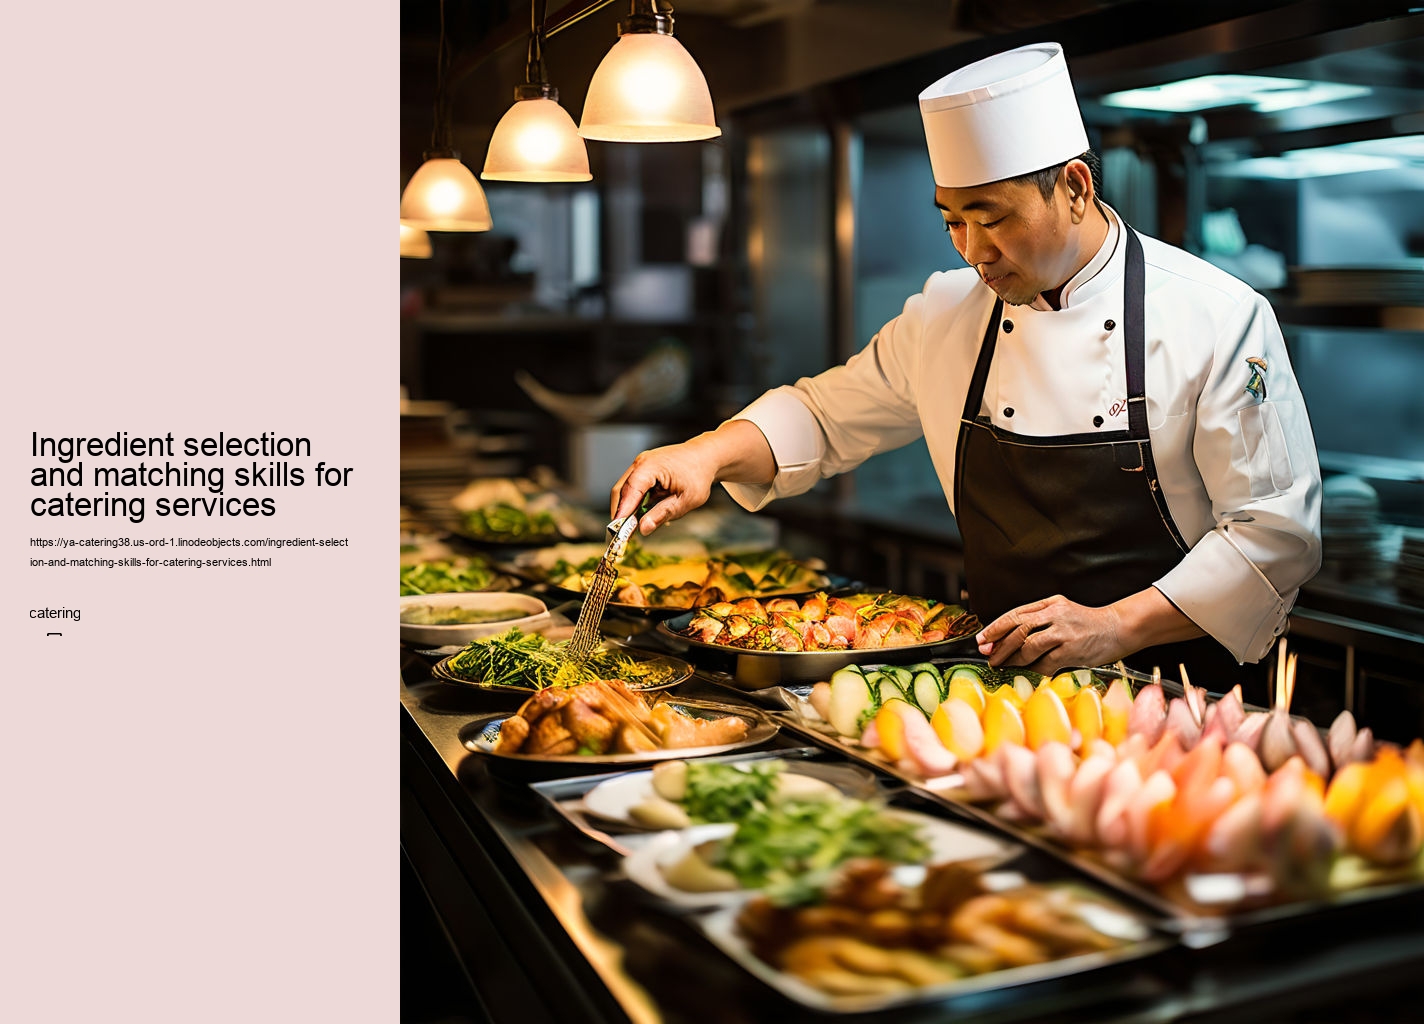 Ingredient selection and matching skills for catering services